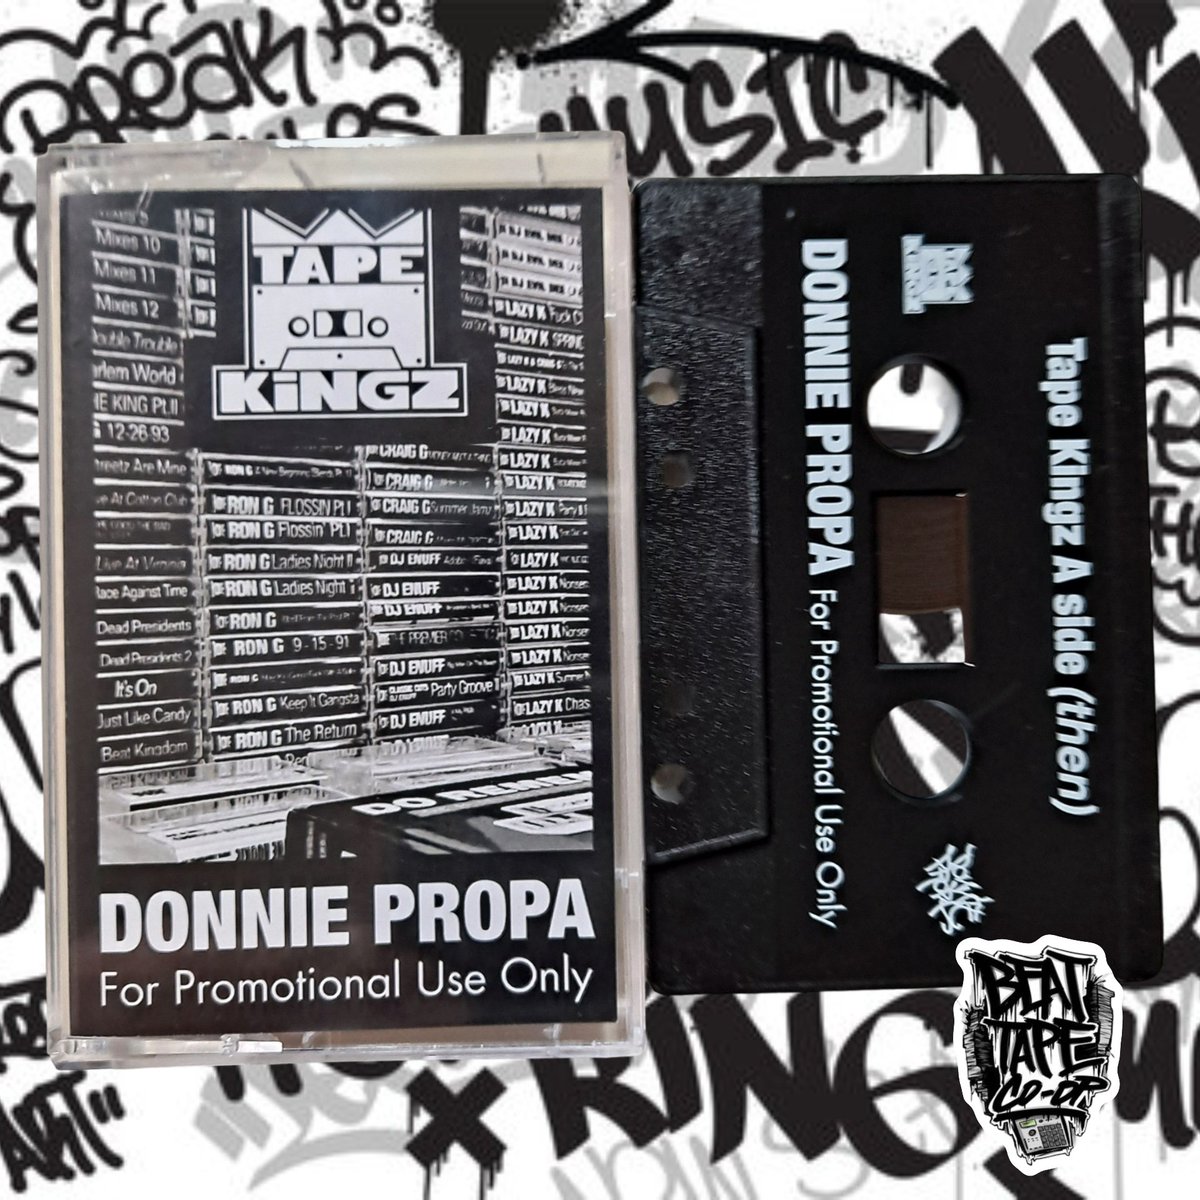 Donnie Propa - Donnie Propa - For Promotional Use Only (Tape Kingz)
Released On: March 1, 2024
Bandcamp: donniepropa.bandcamp.com/album/donnie-p…

#donniepropa #tapekingz #mixtape #hiphop #mop #bigl #common #bennythebutcher #cassette #tape #support #beattapecoop